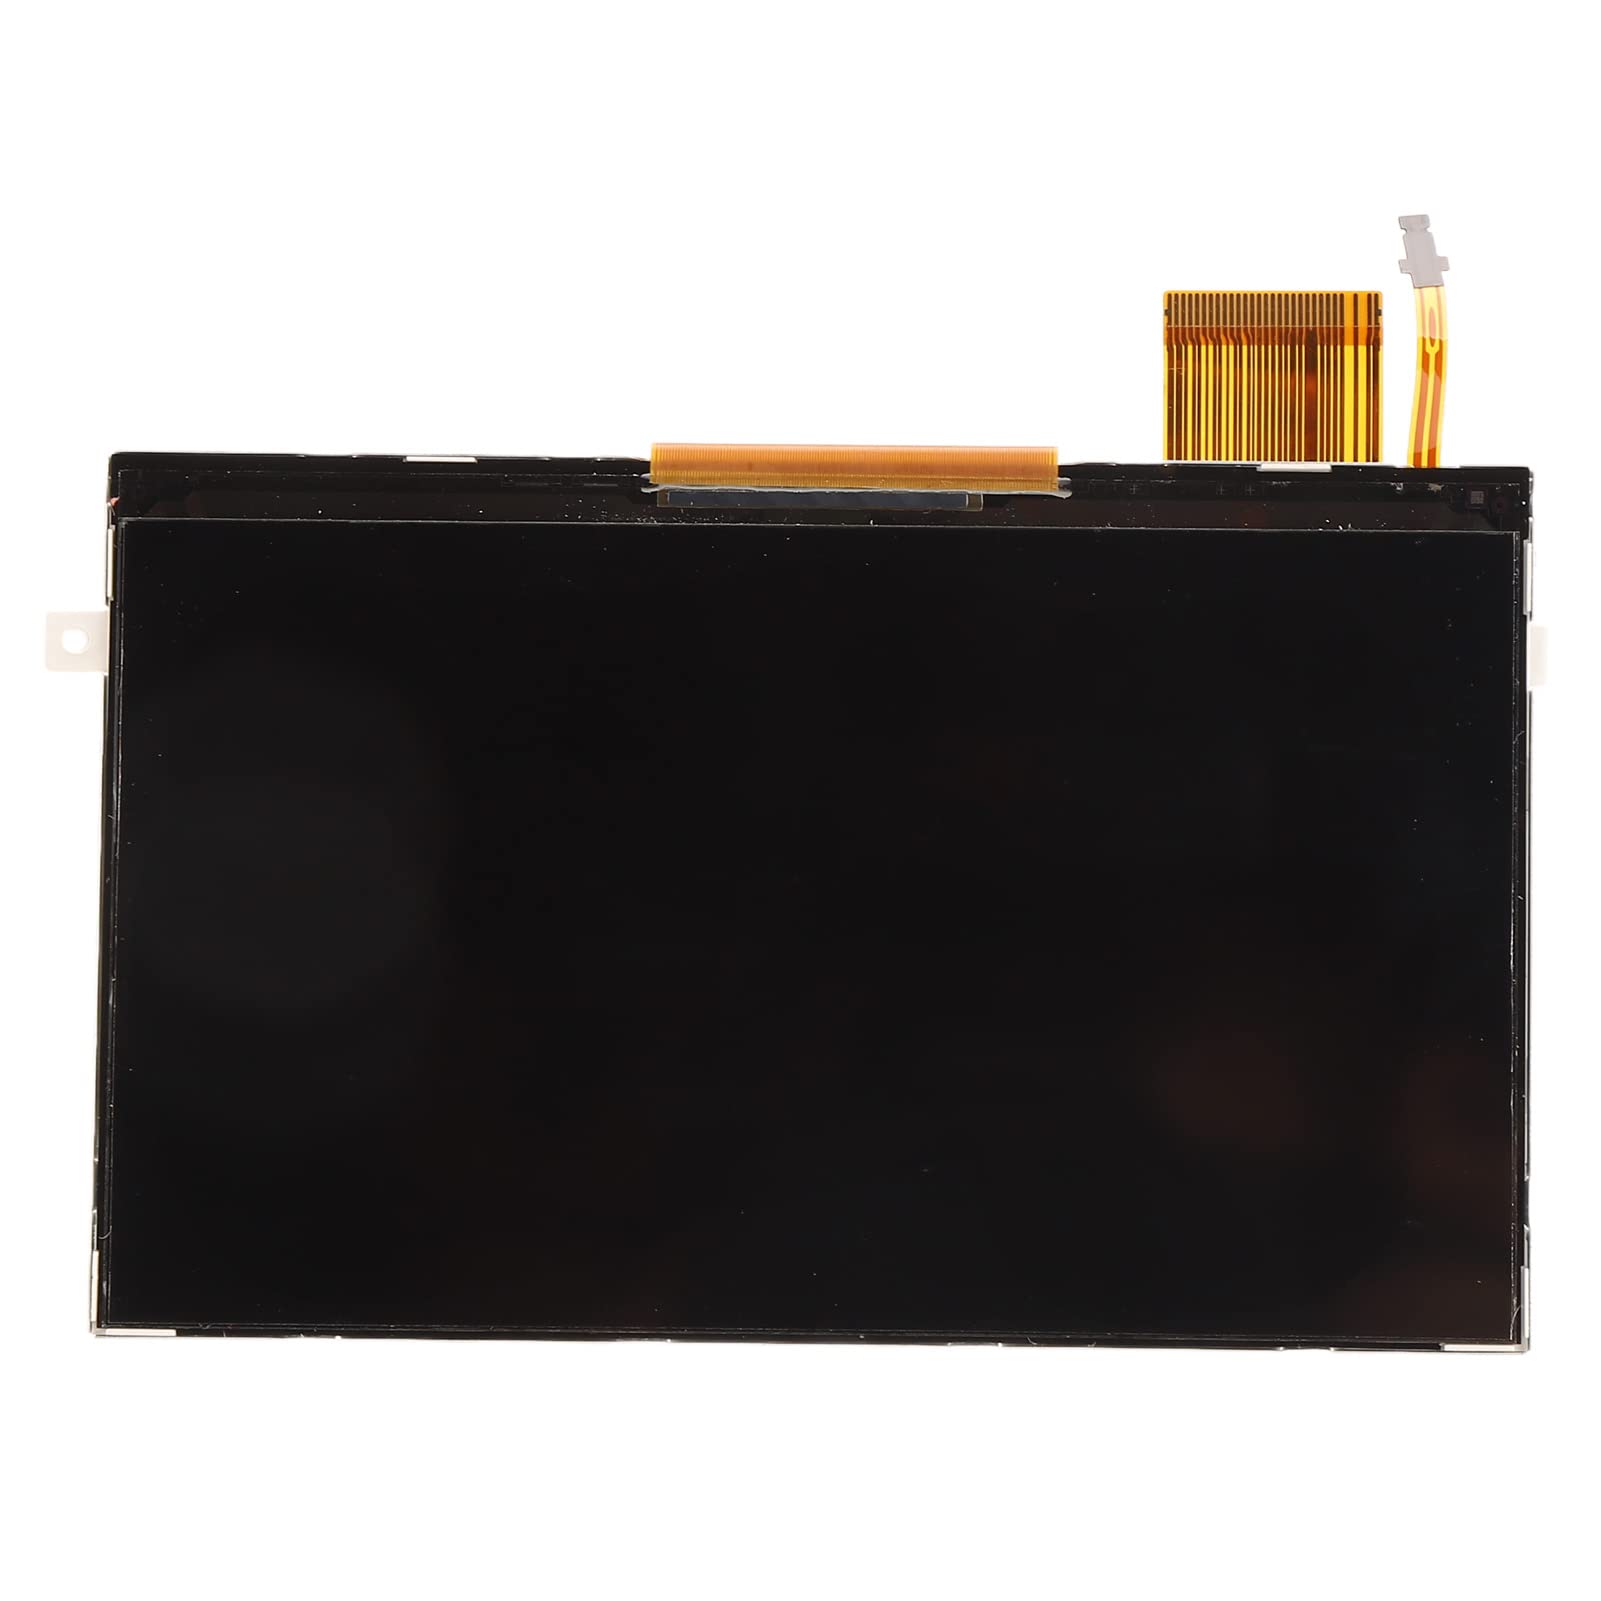 for PSP Display, Easy to Install Fix Repair Replacement LCD Display Screen for PSP 3000 Series Console LCD Screen Parts, High Assembly Accuracy